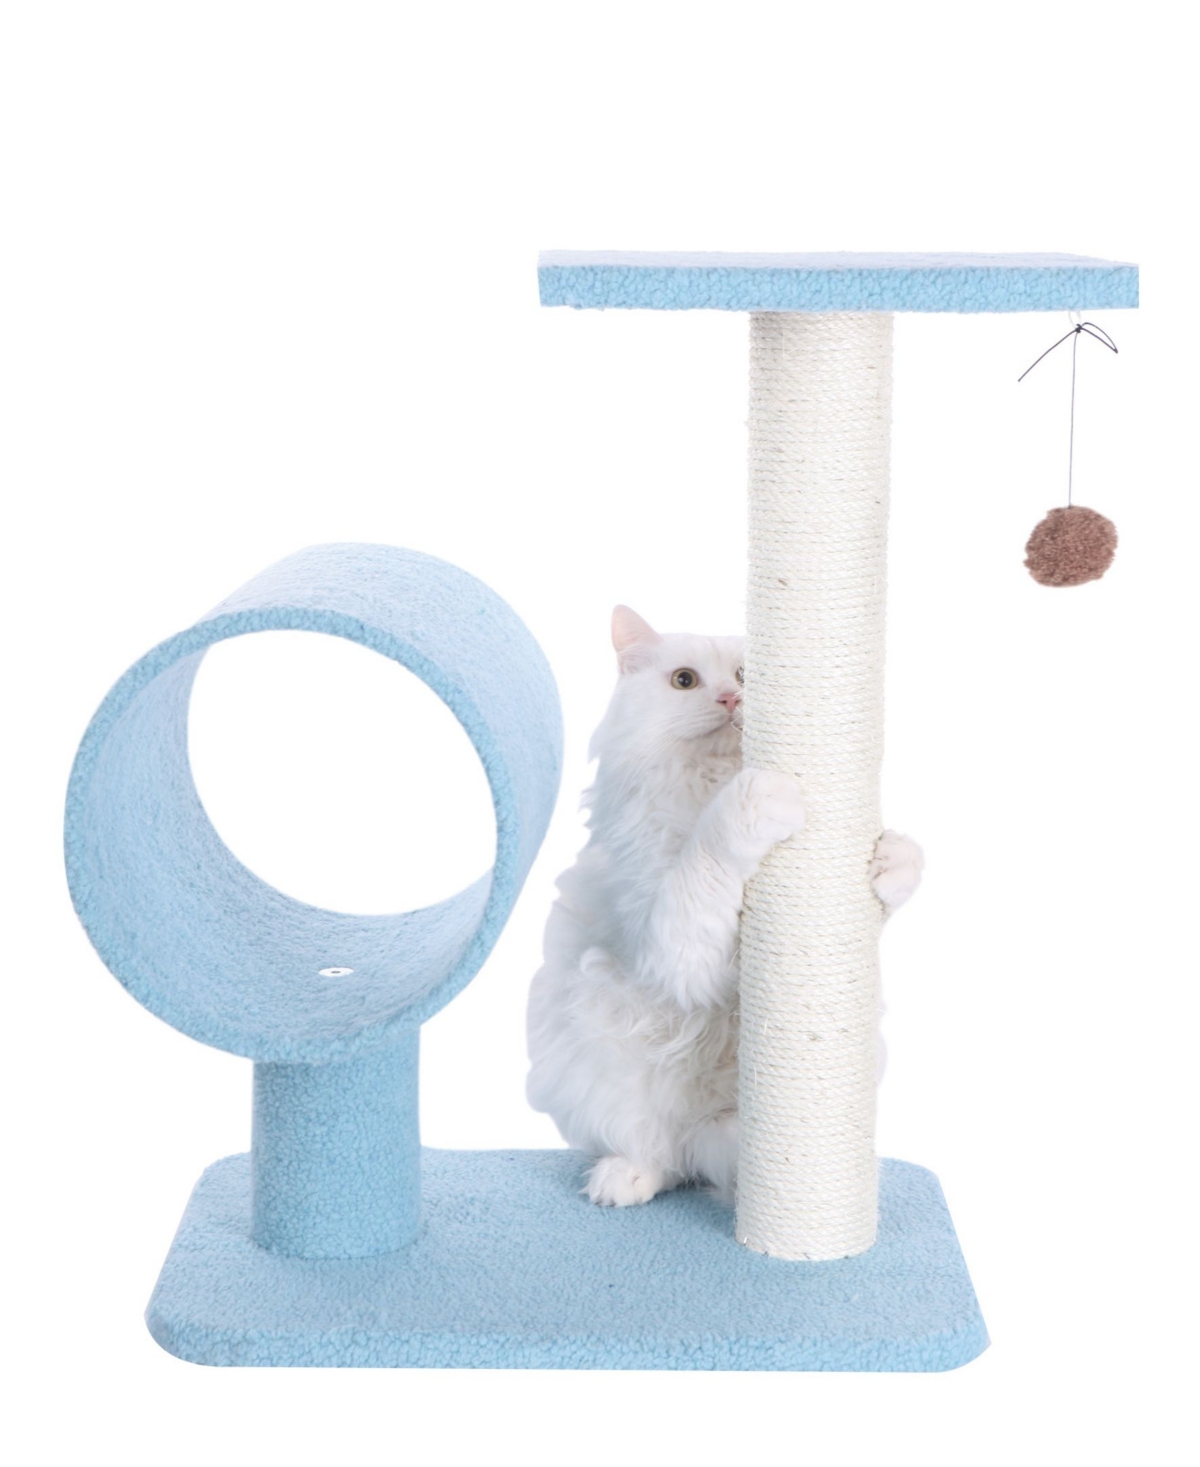 25" Real Wood Cat Tree With Scratcher And Tunnel For Privacy - Sky Blue